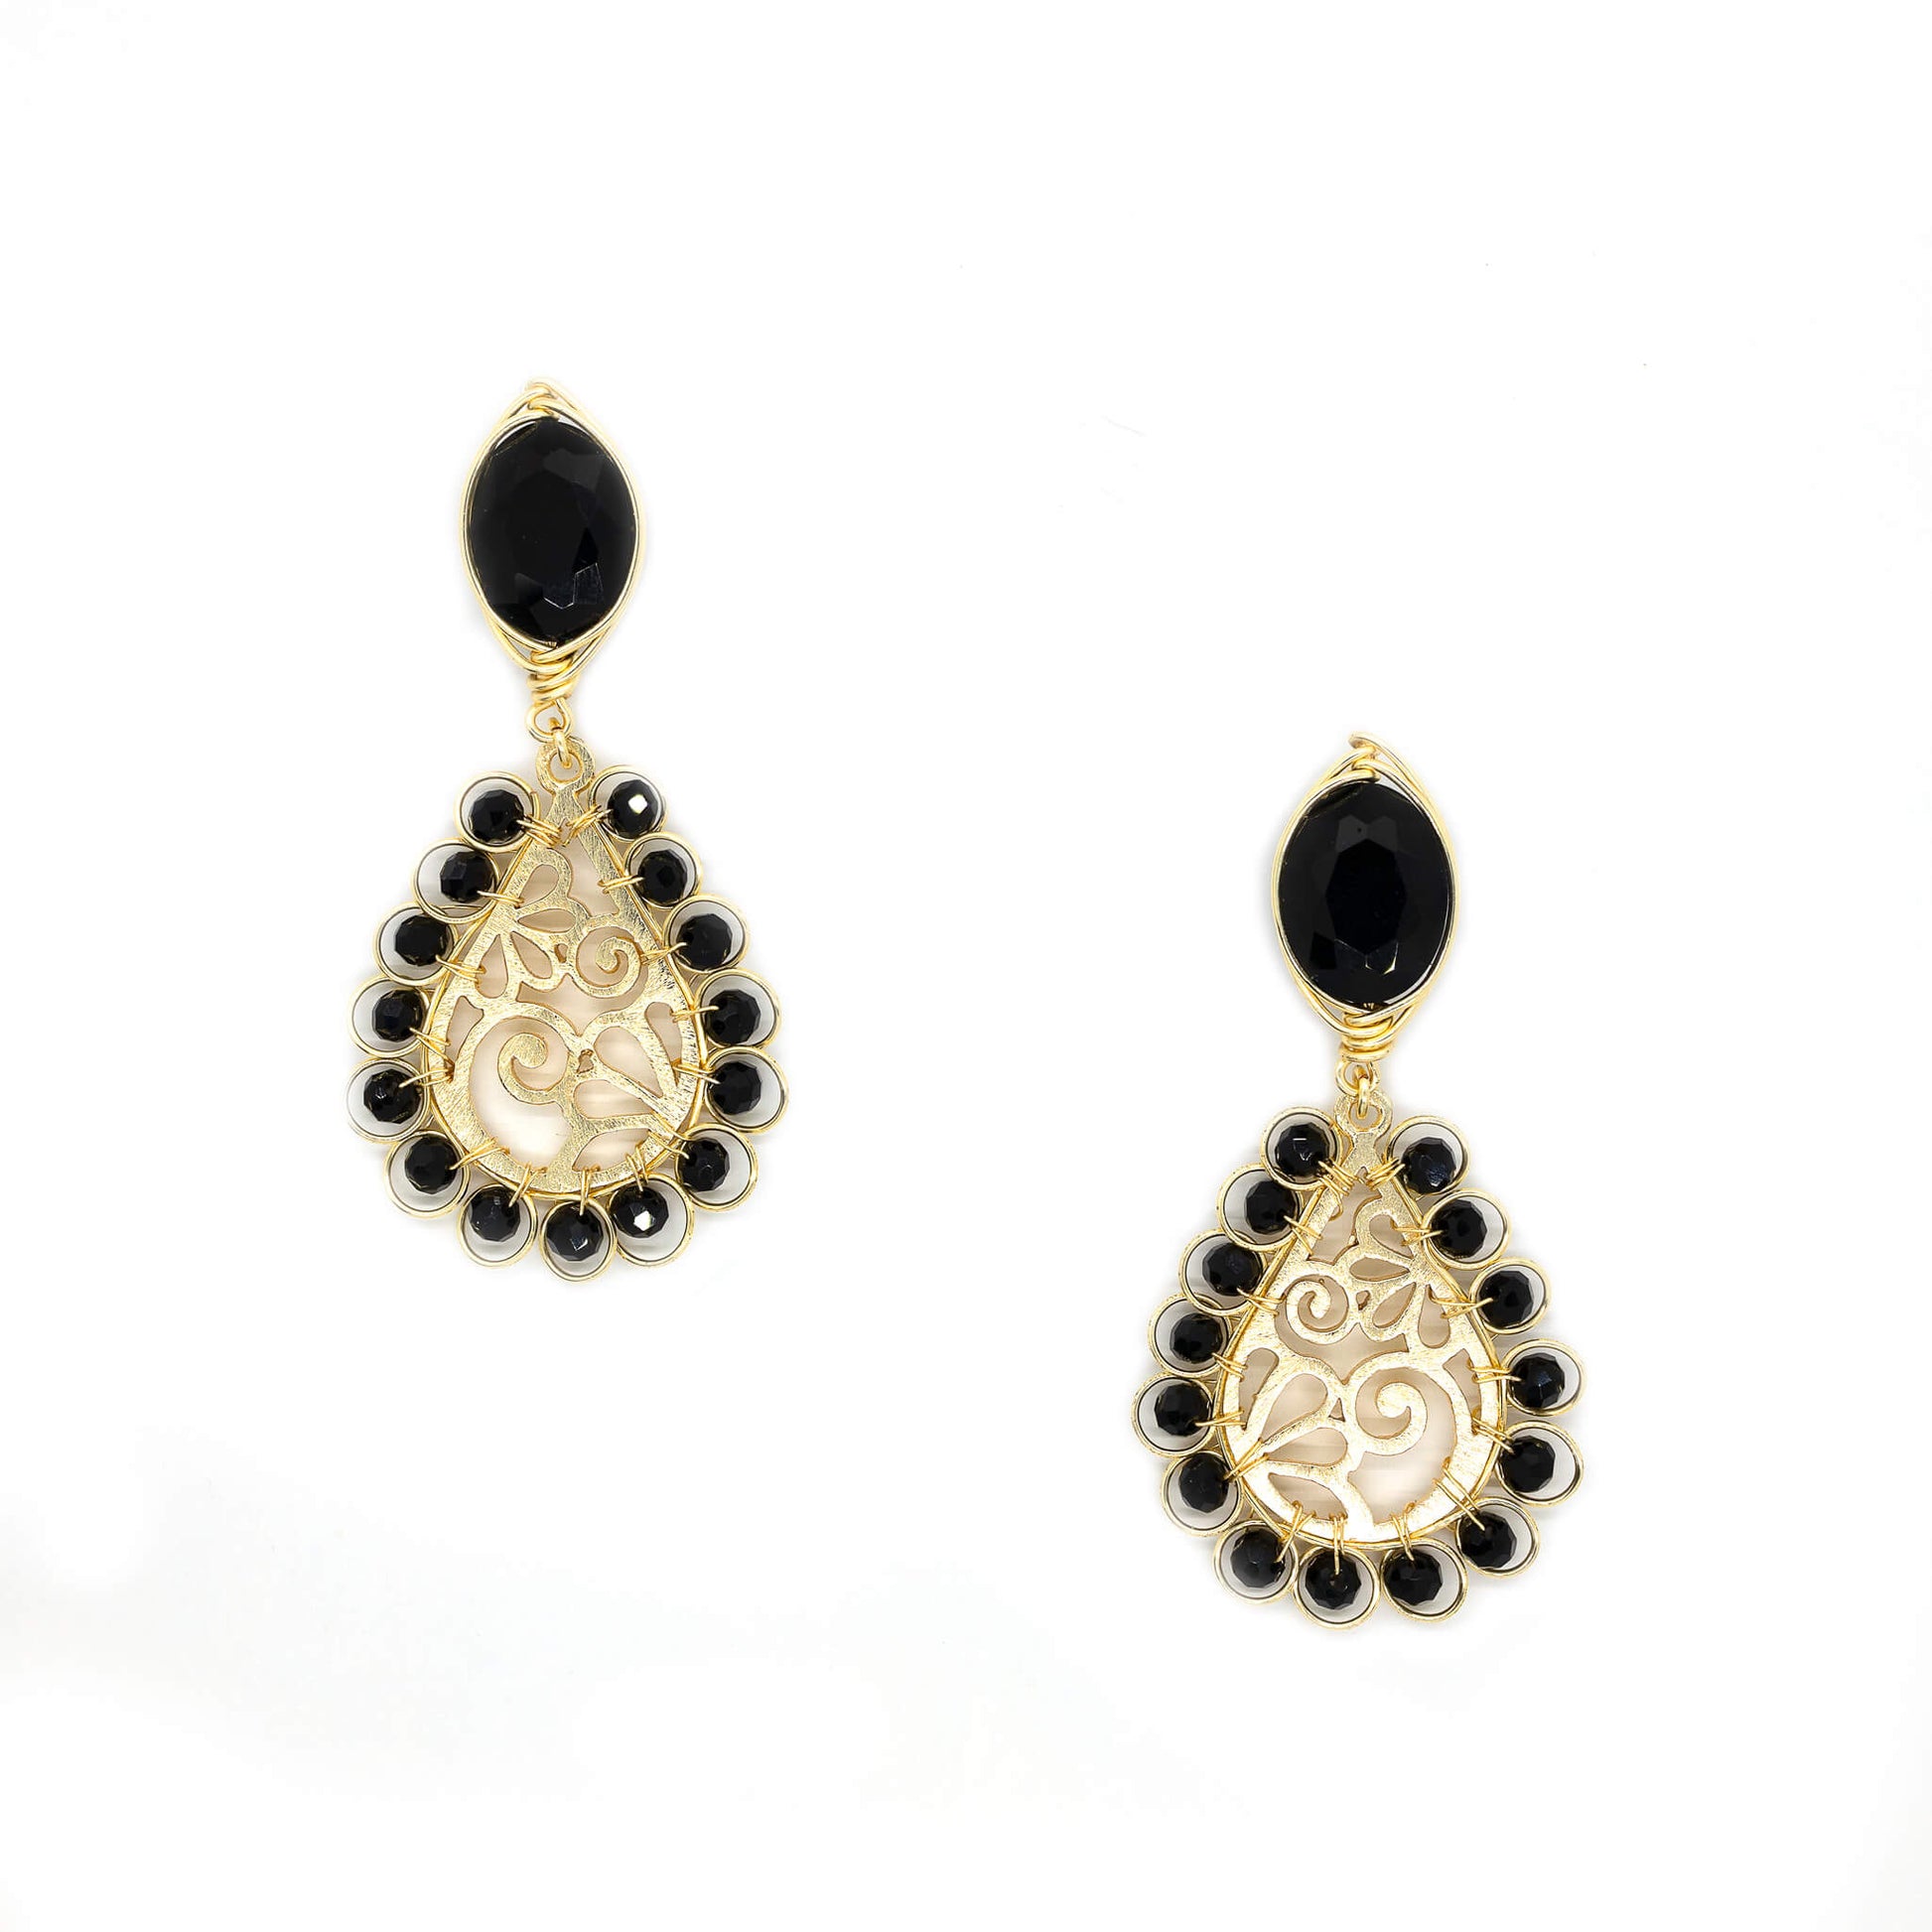 Ekani Earrings are 2.5 inches long. Gold and Black earrings. Wire wrapped teardrop earrings. Handmade with non-tarnish gold plated wire and Crystal beads. Dangle earrings.